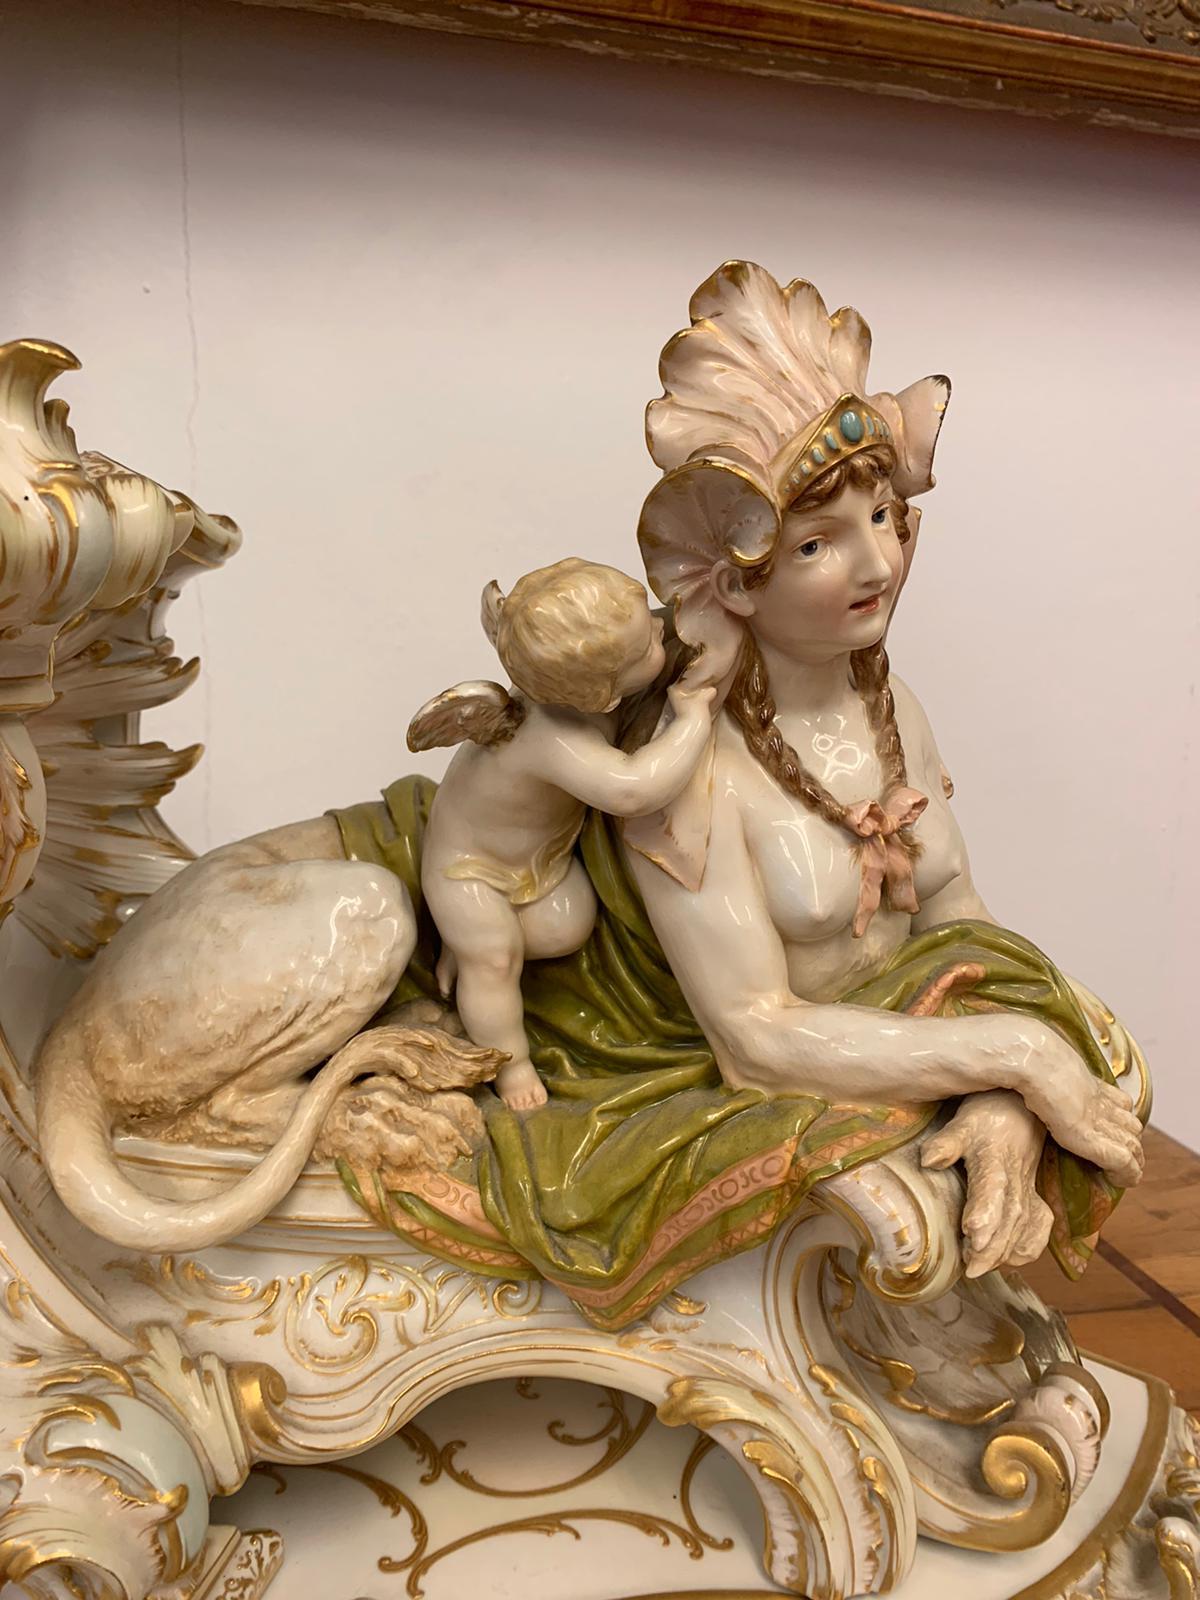 Porcelain Fireplace-Mantel Clock with Two Sphinxes and Cherubs KPM, Berlin 1